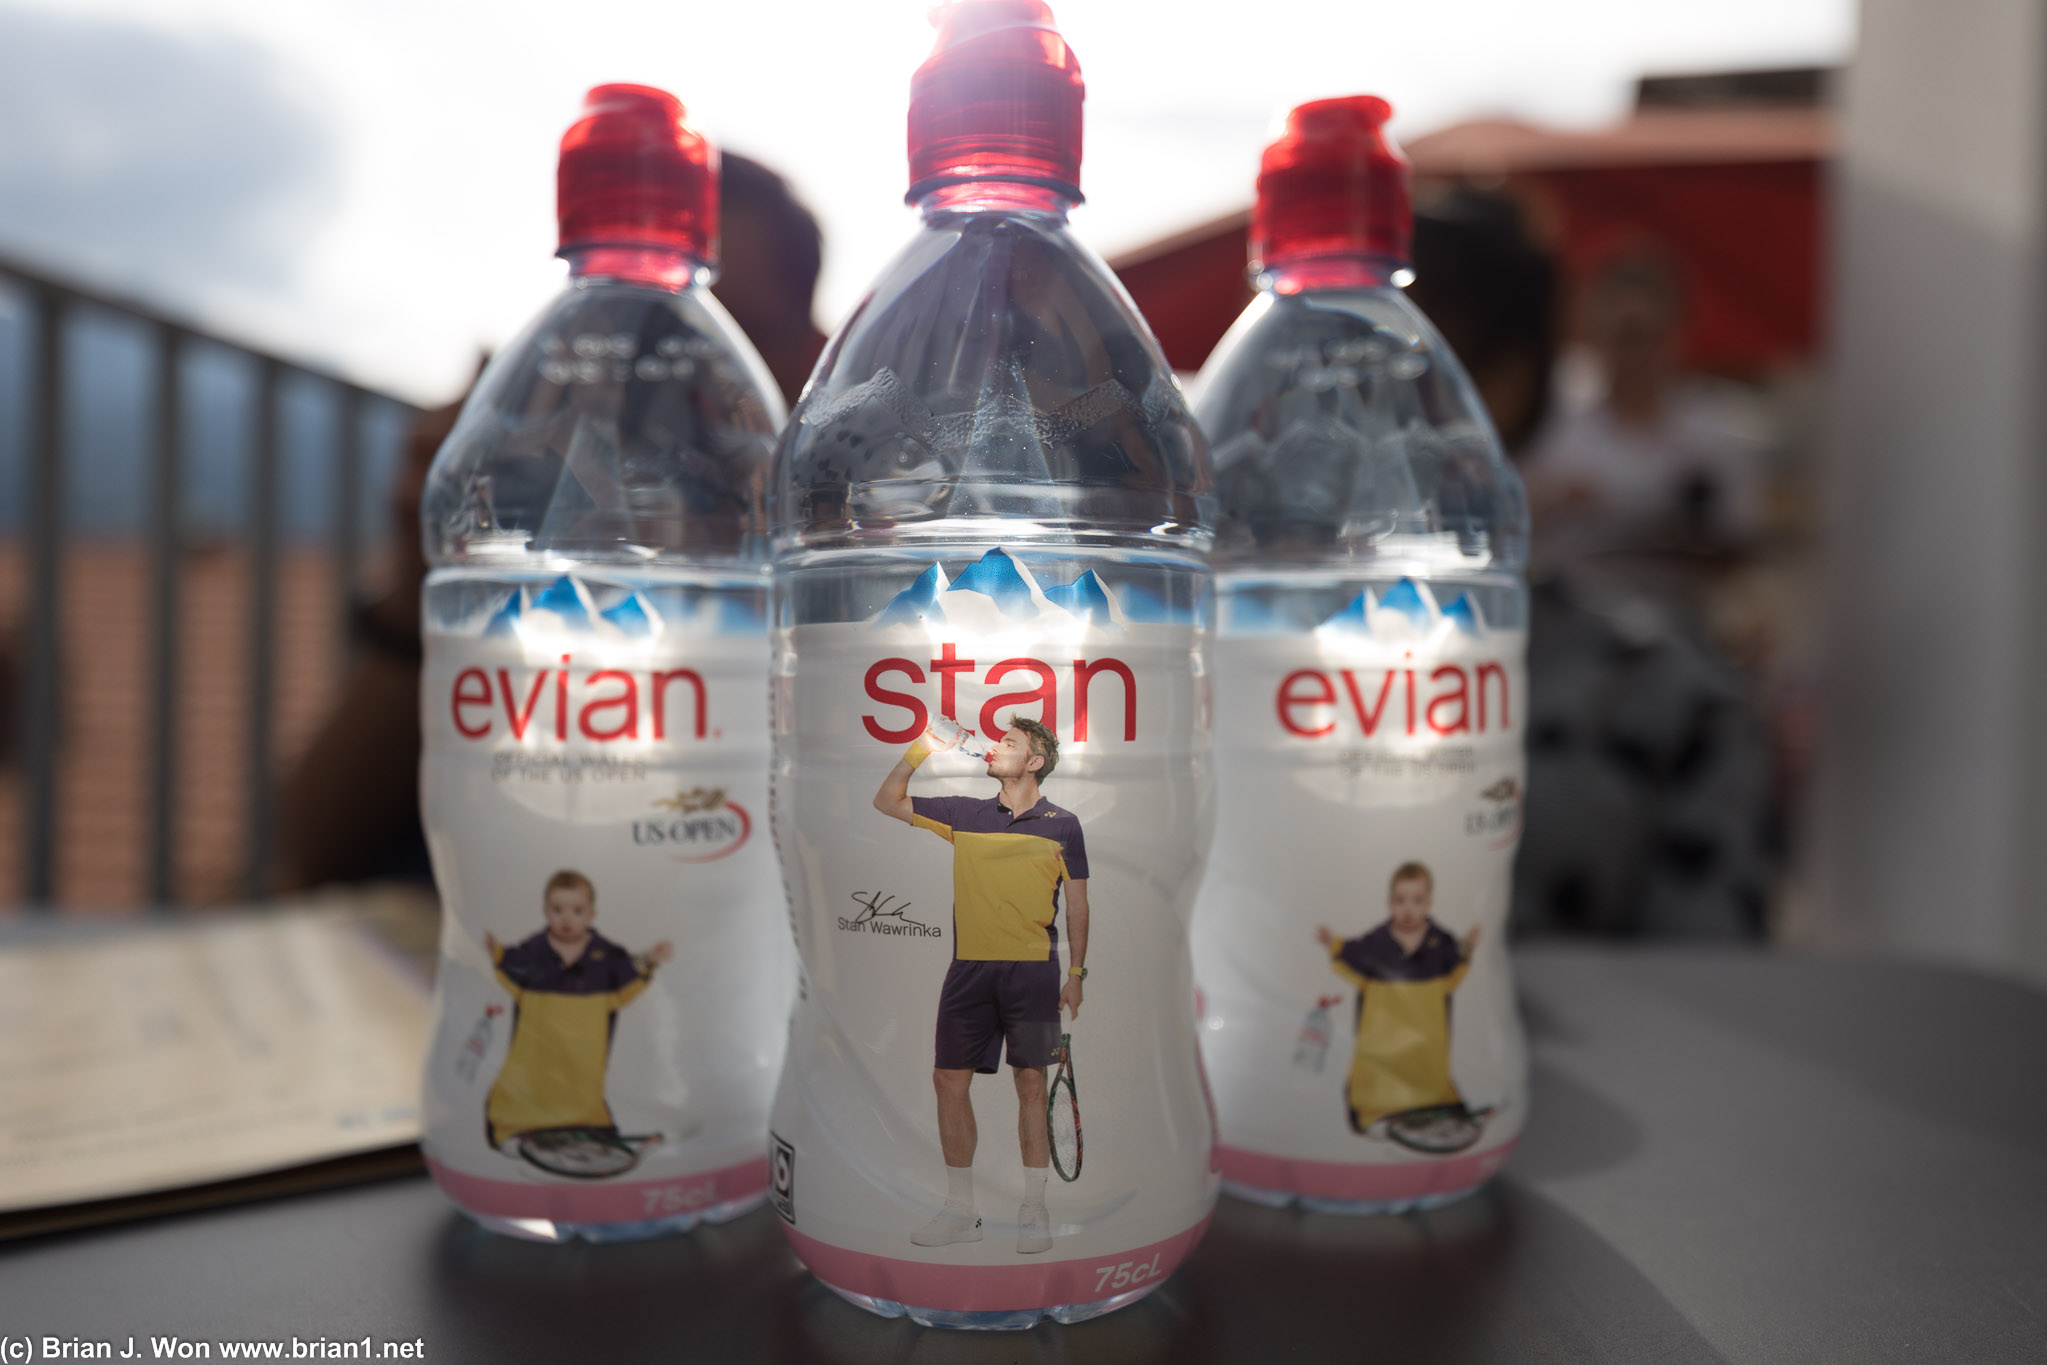 Evian's waterbottles/full-on tennis ads with Stan Wawrinka.